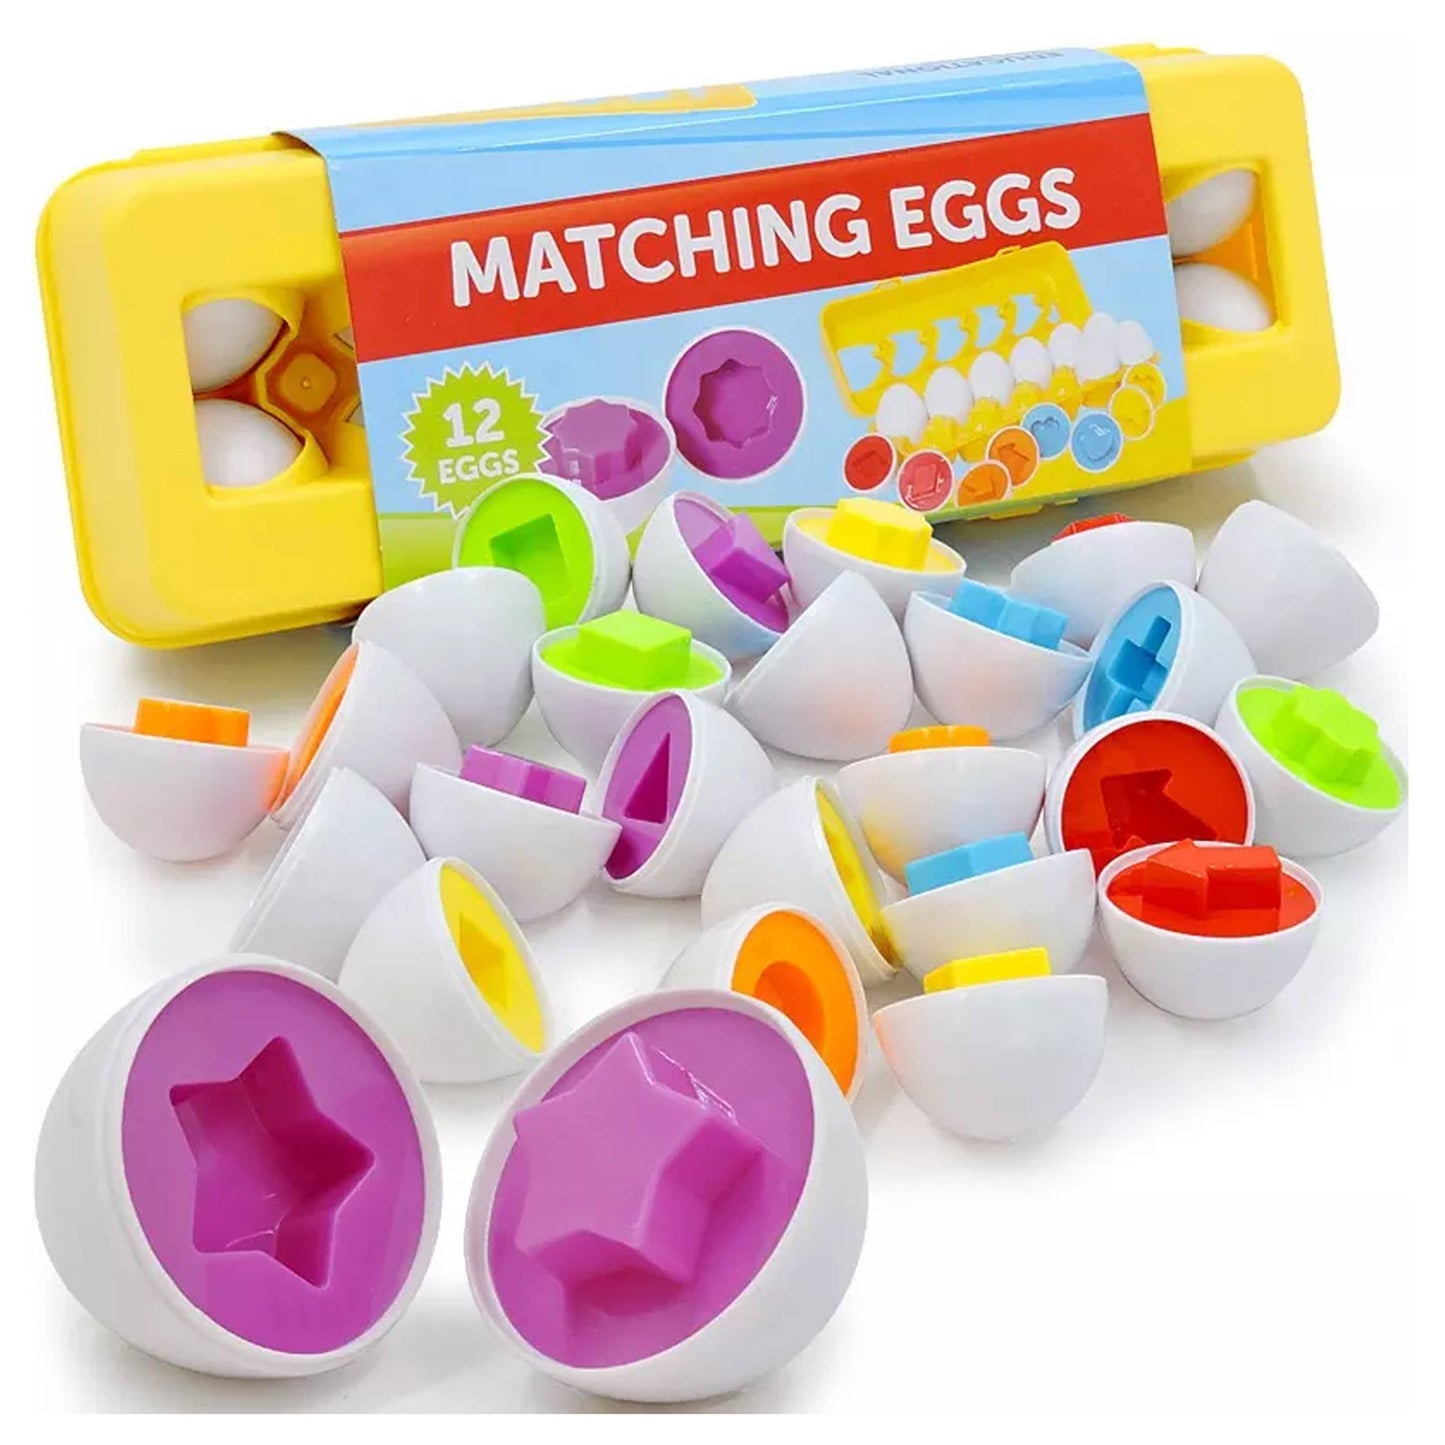 Match Up Eggs Early Education Learning Toy For Kids